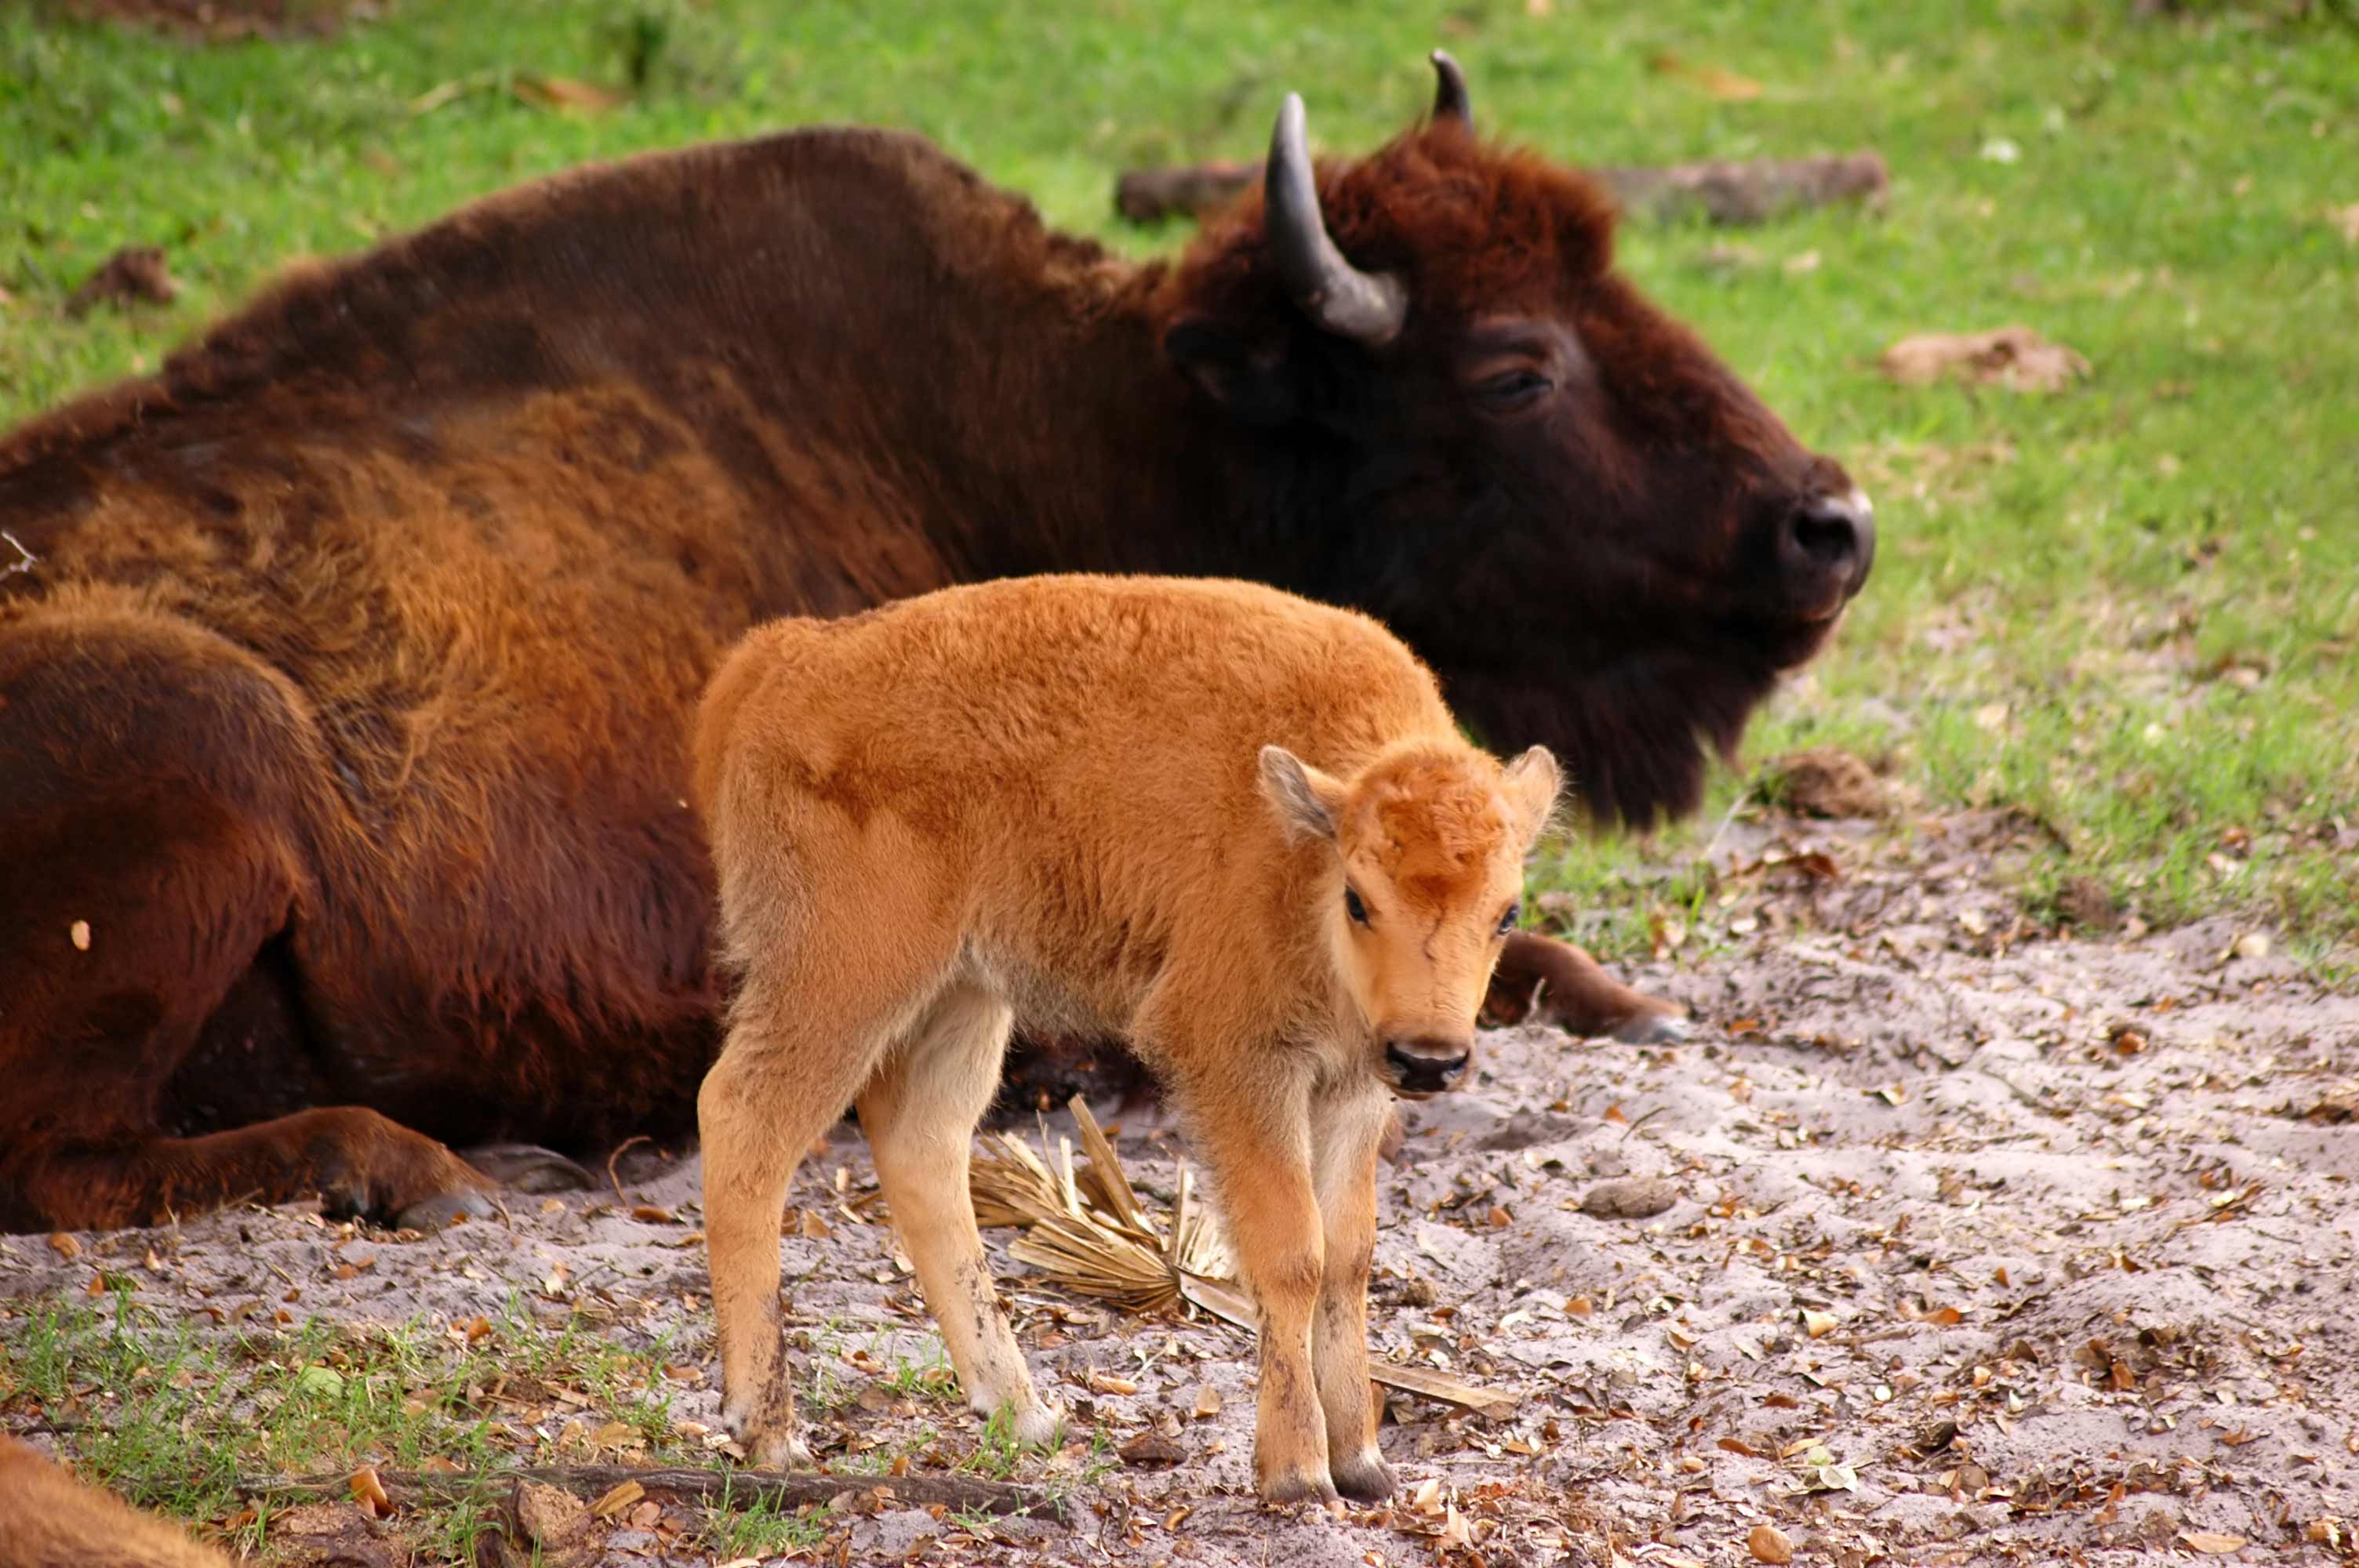 A bison and its calf in a field.